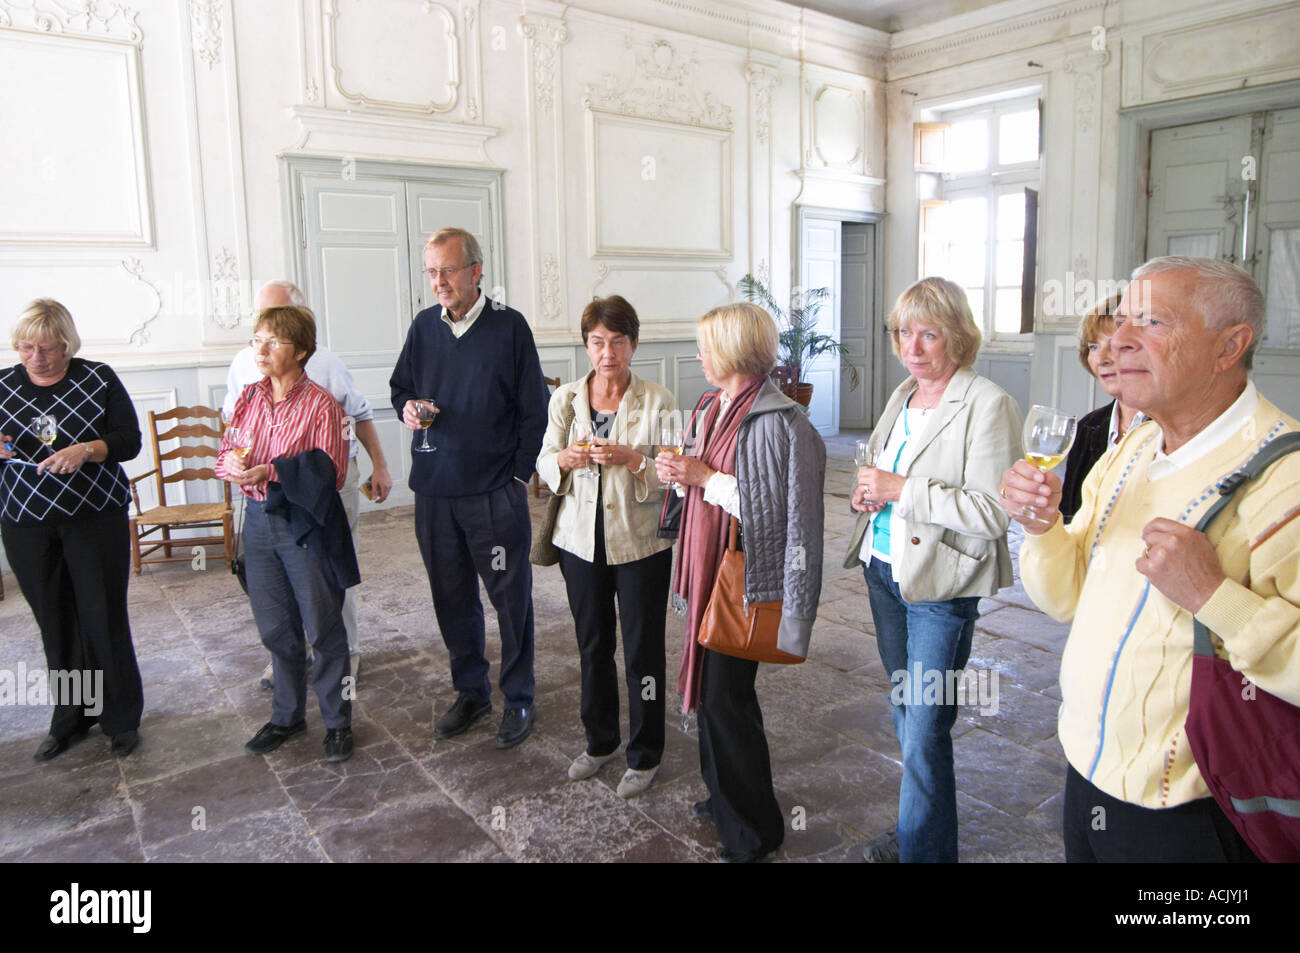 Visitors enjoying the Aperitif served in the entrance hall, a glass golden yellow of Chateau de Cerons  Chateau de Cerons (Cérons) Sauternes Gironde Aquitaine France Stock Photo